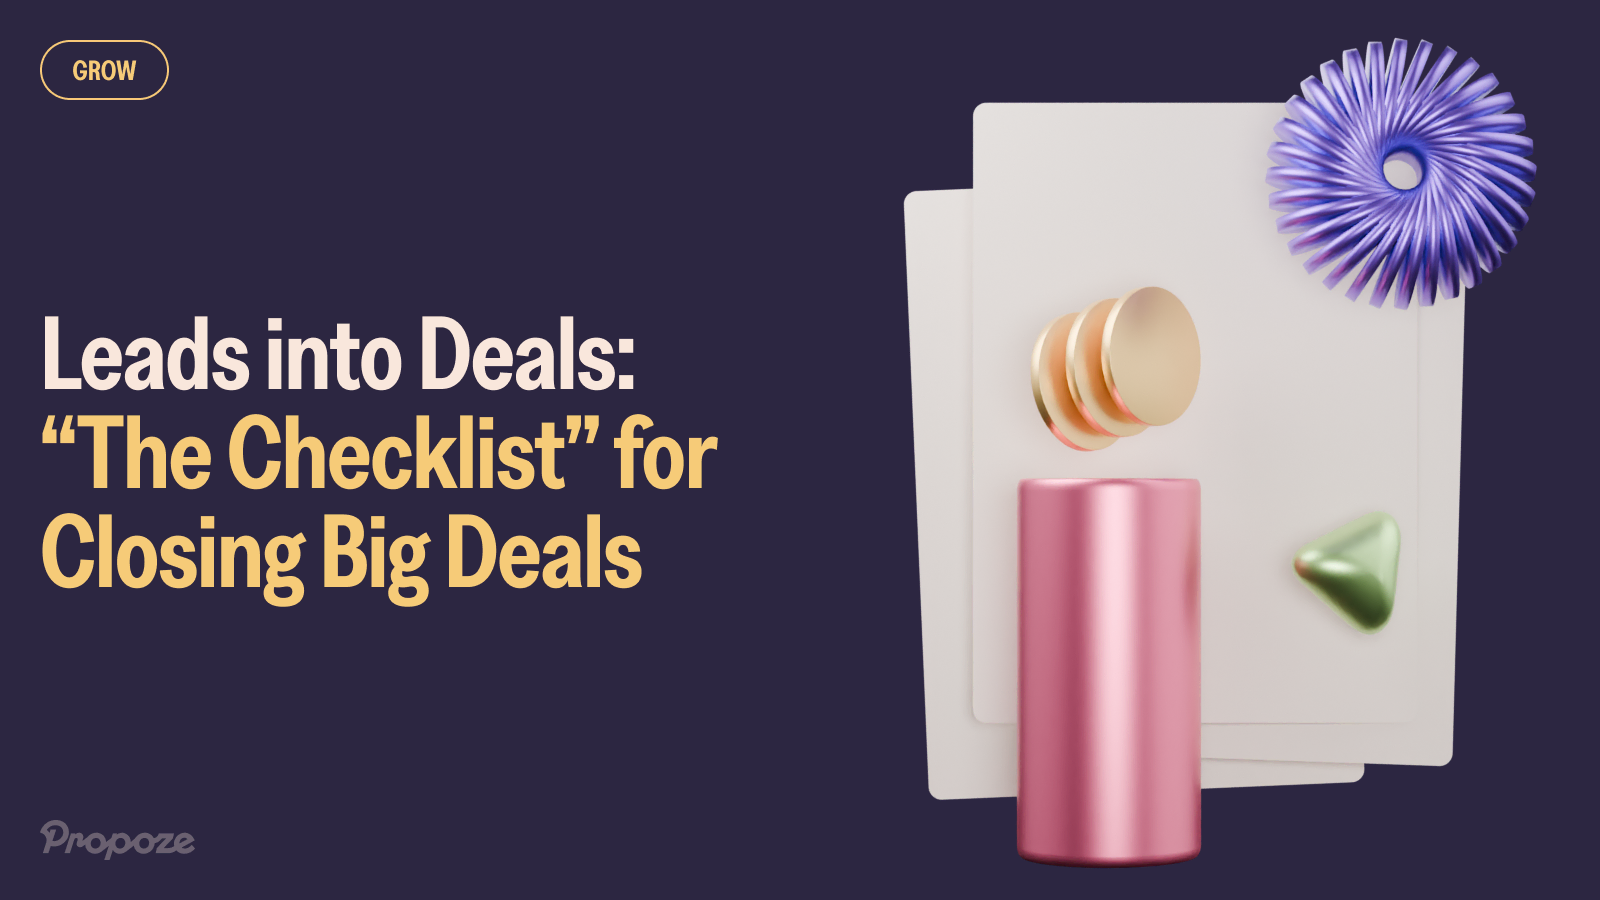 Leads into Deals: “The Checklist” for Closing Big Deals